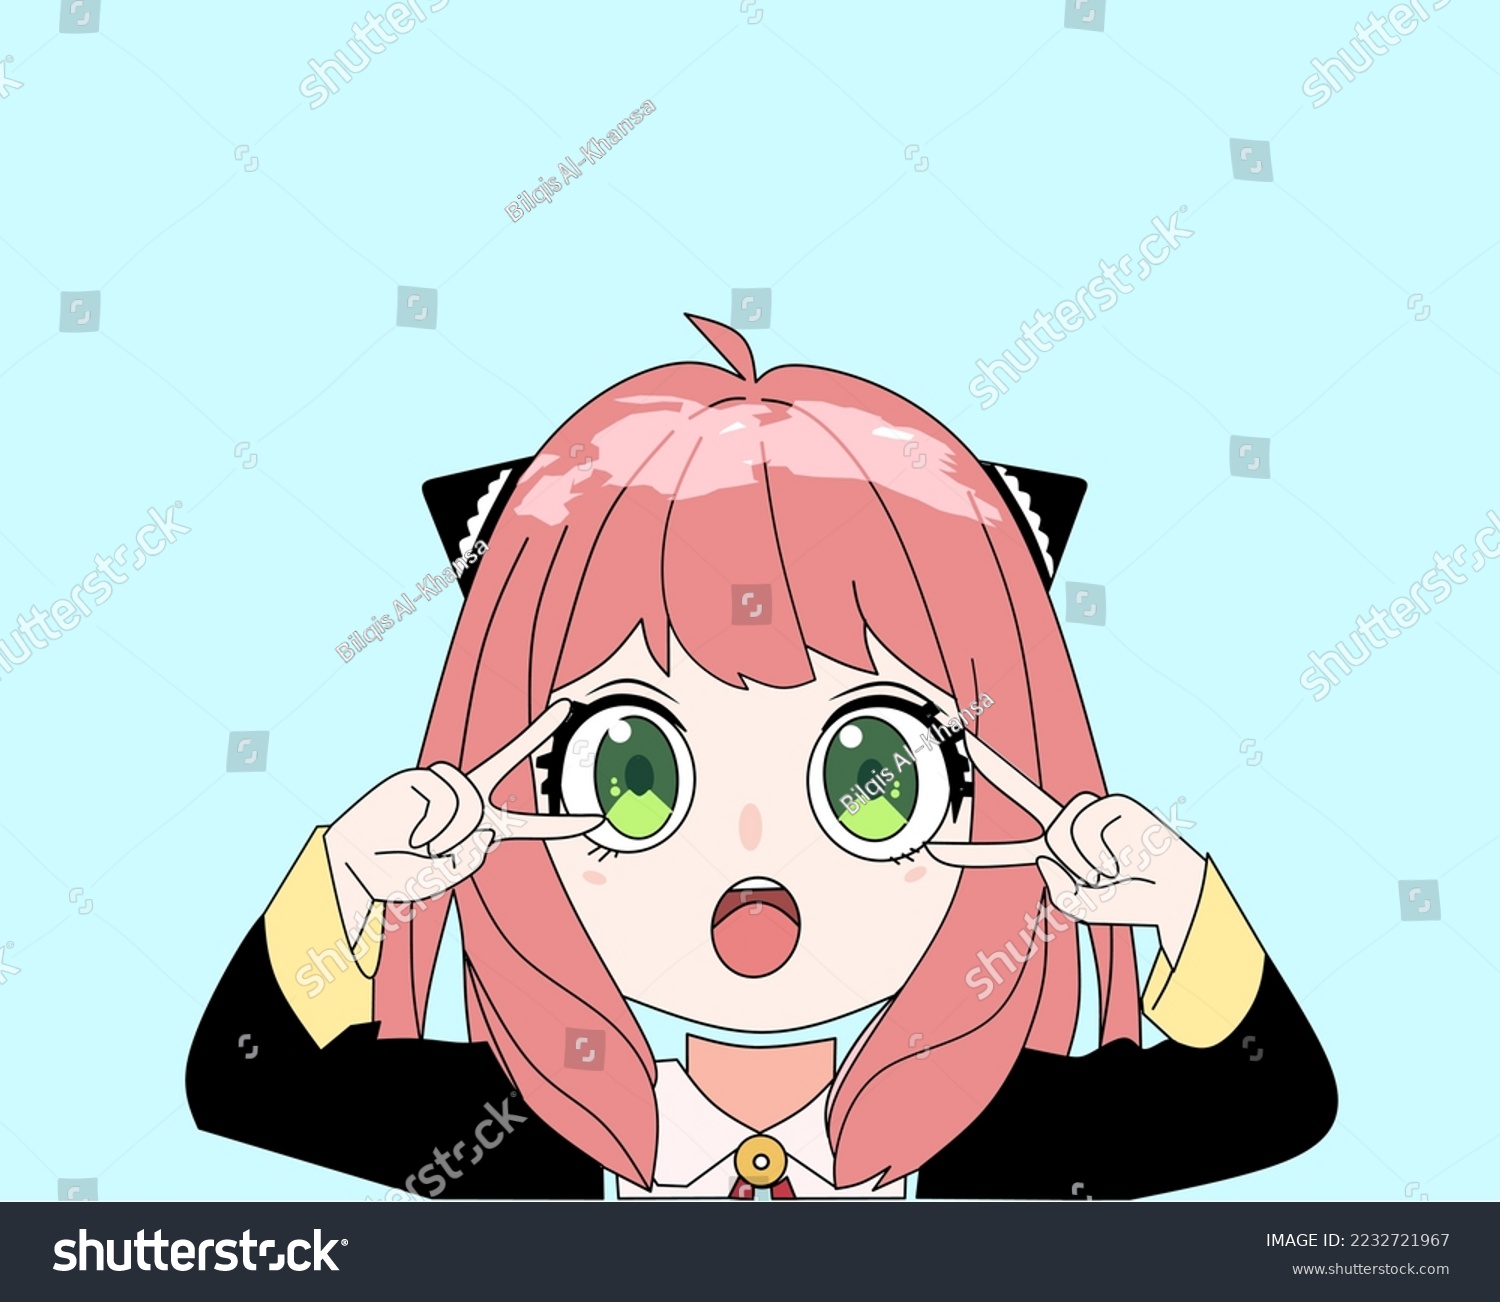 SVG of Vector of japanese anime character svg